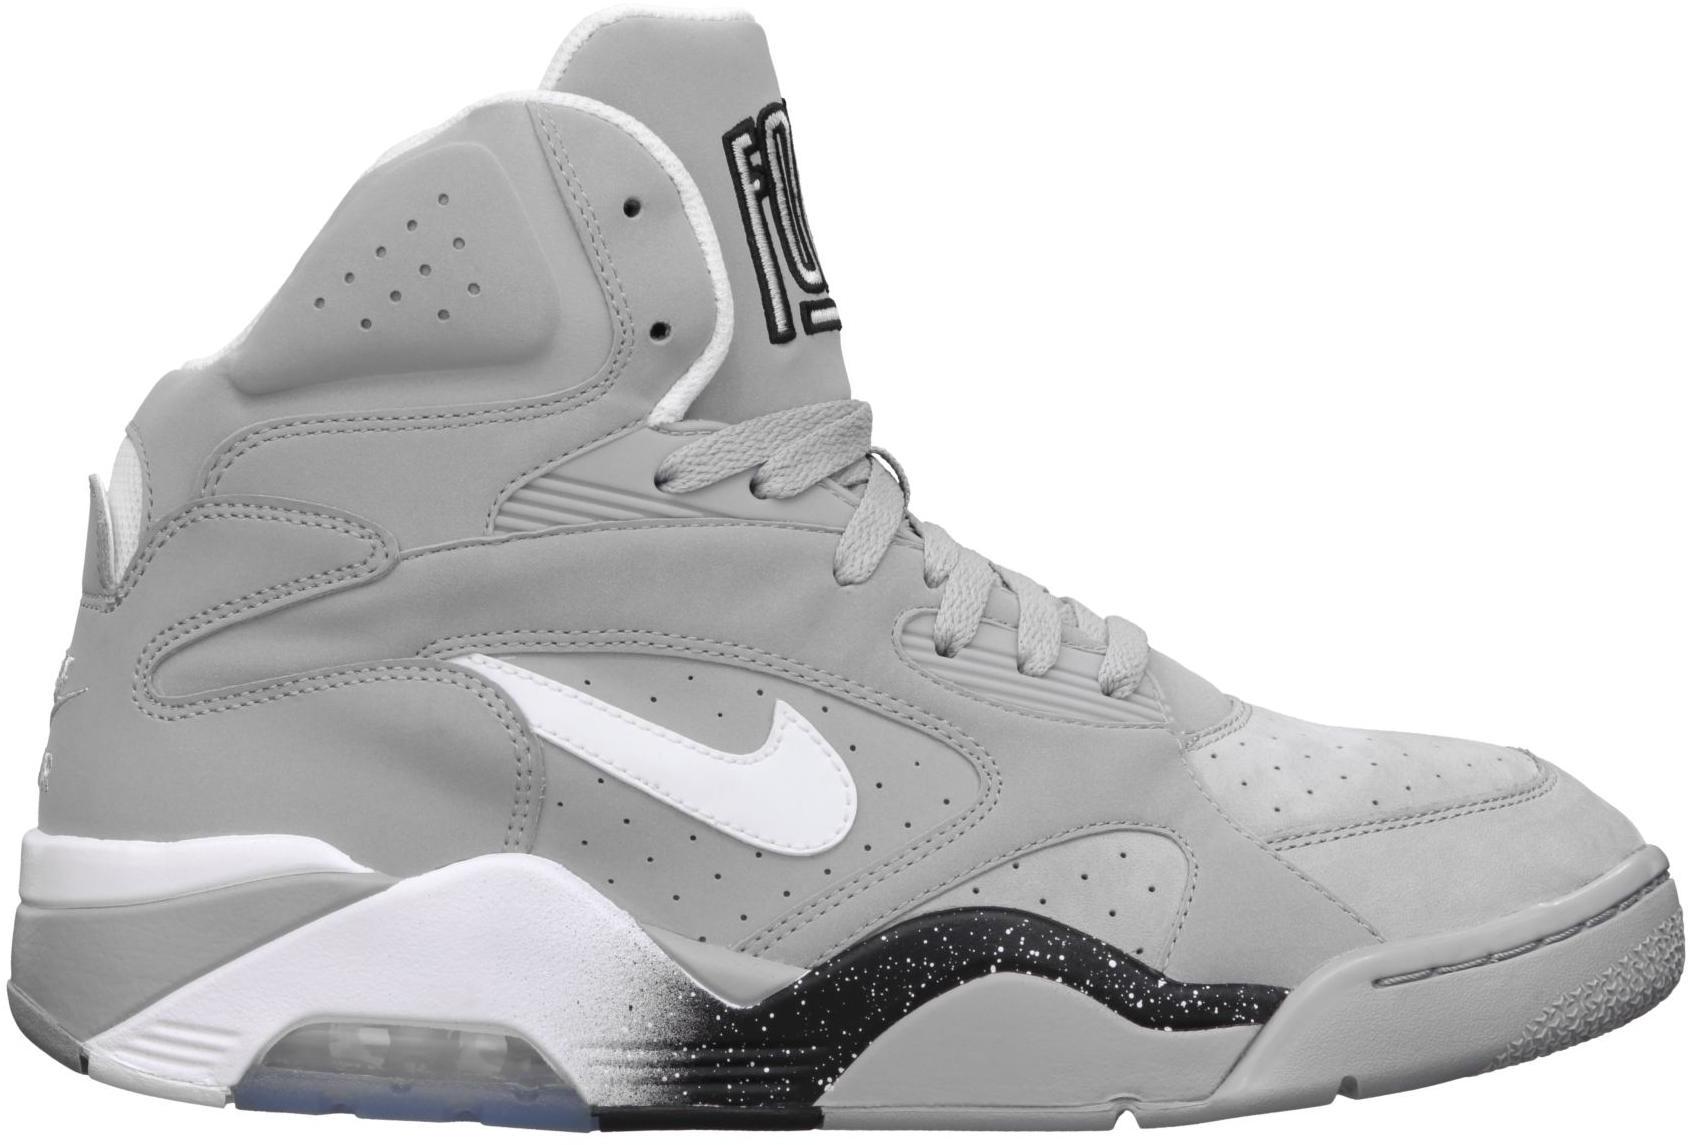 nike new air force 180 mid mens basketball shoes